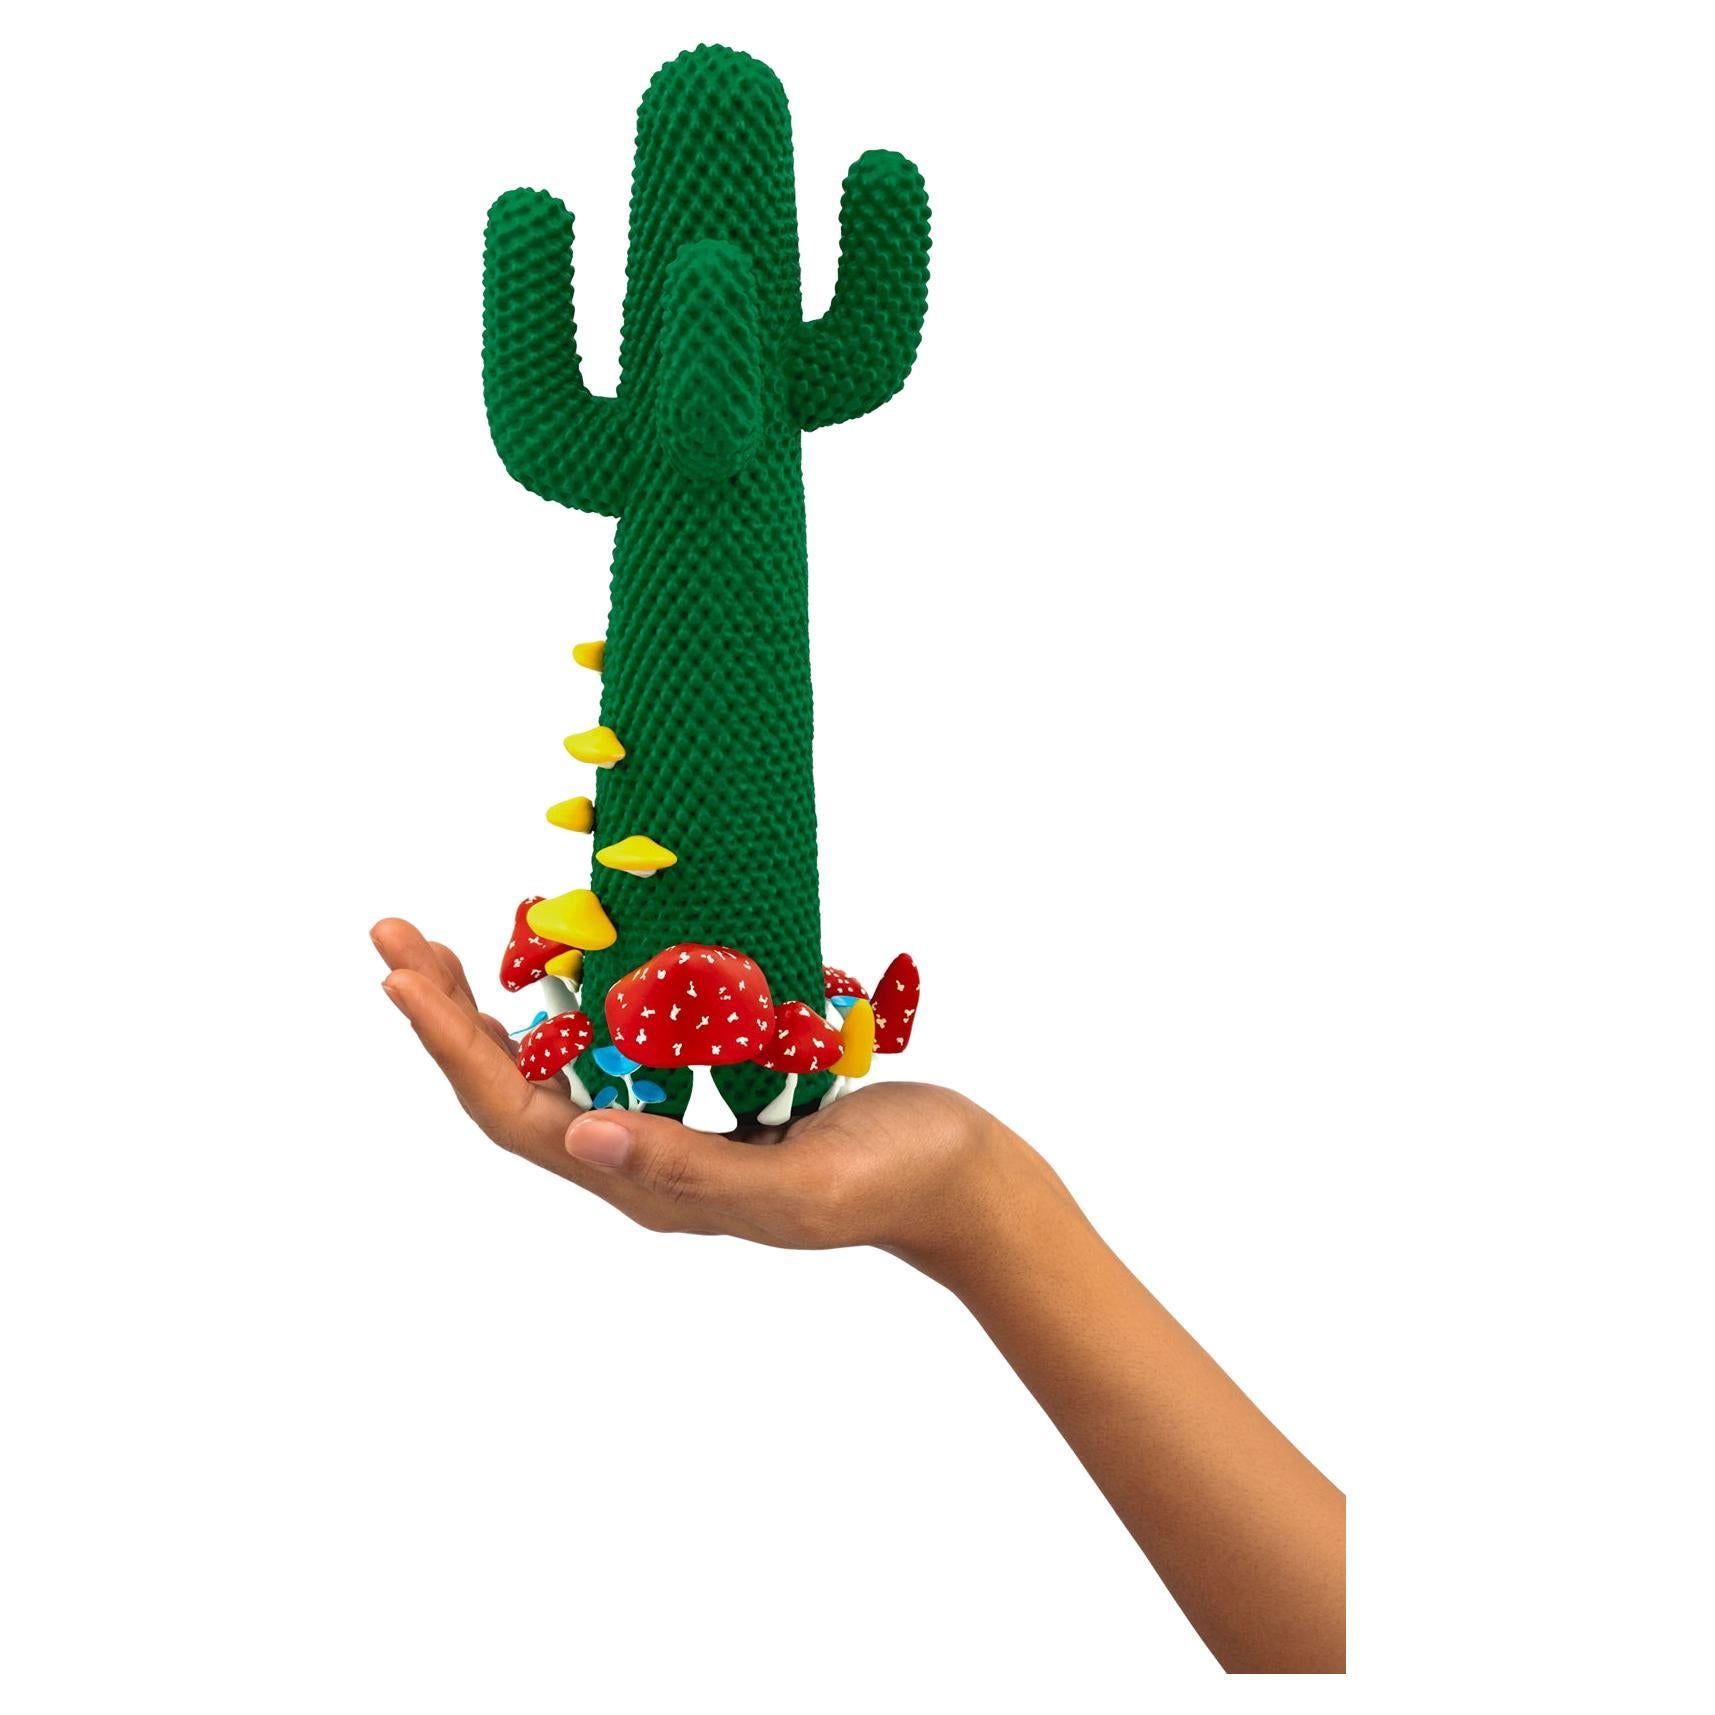 Limited Edition #82/99

Gufram presents the miniaturised version of the Shroom CACTUS® created in collaboration with A$AP Rocky and the artist’s new design studio HOMMEMADE Exactly as the real-Size Shroom CACTUS®, the new Guframini piece features